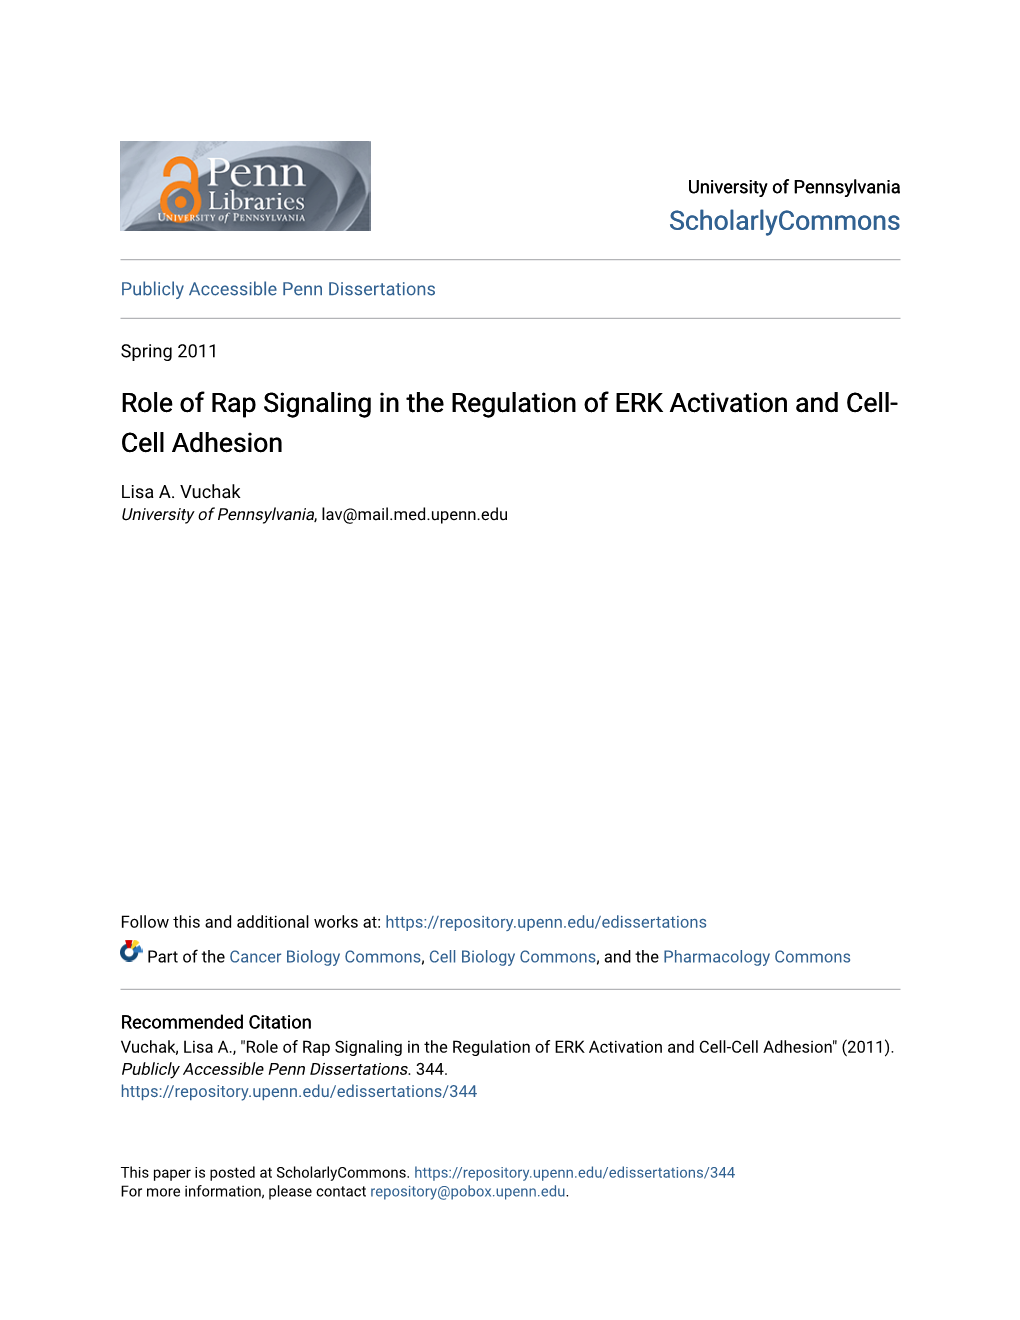 Role of Rap Signaling in the Regulation of ERK Activation and Cell-Cell Adhesion" (2011)